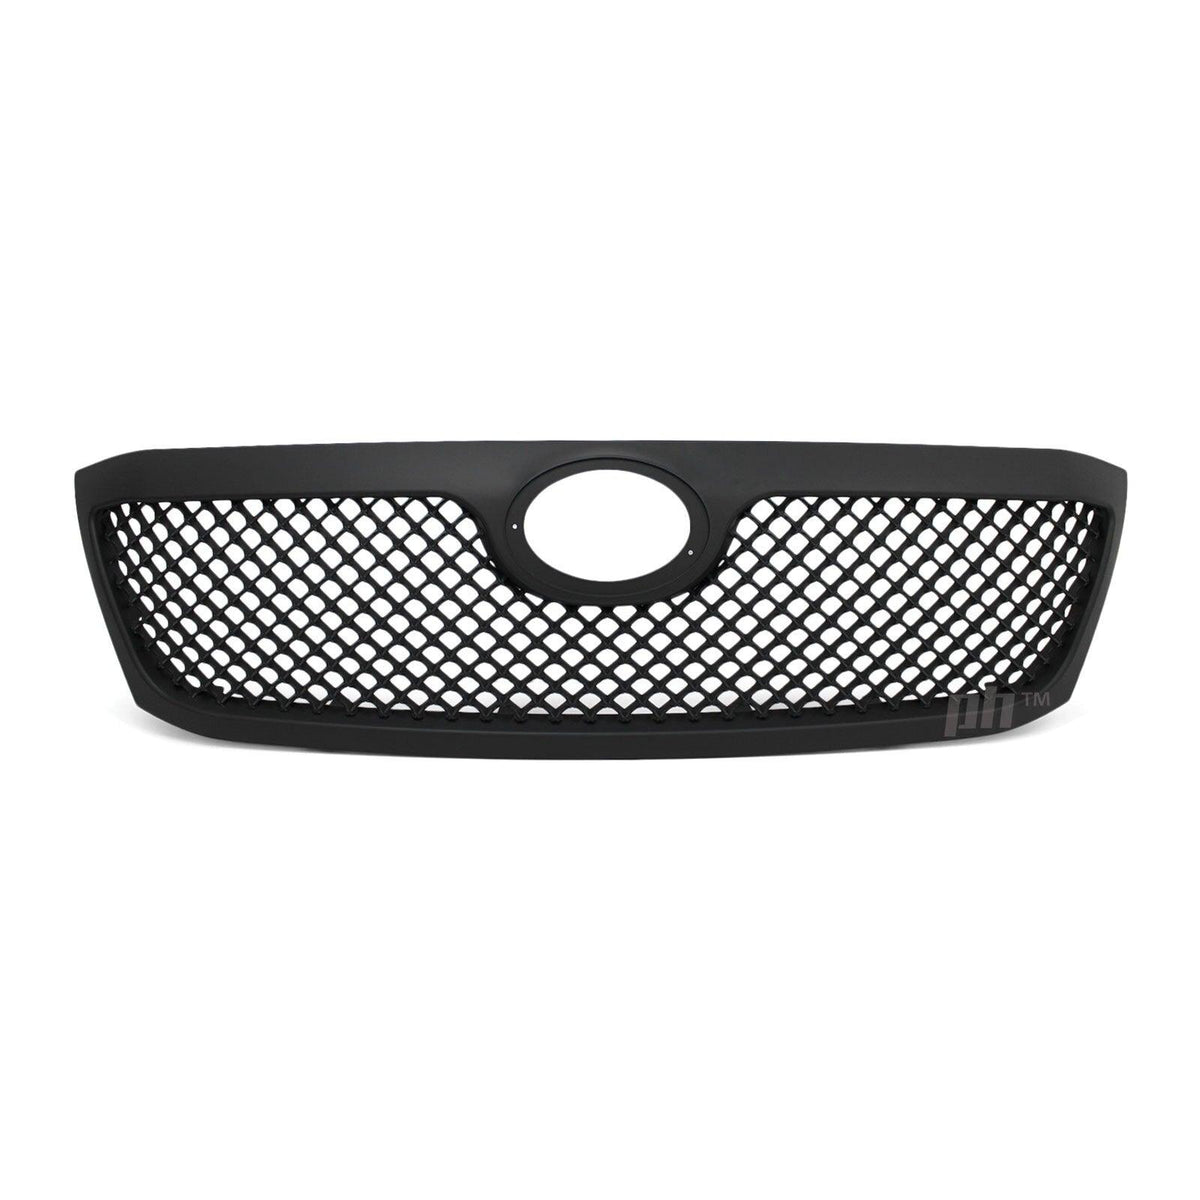 Grill Bentley Style BLACK Edition Fits Toyota Hilux N70 SR SR5 Workmate 08-2011 - 4X4OC™